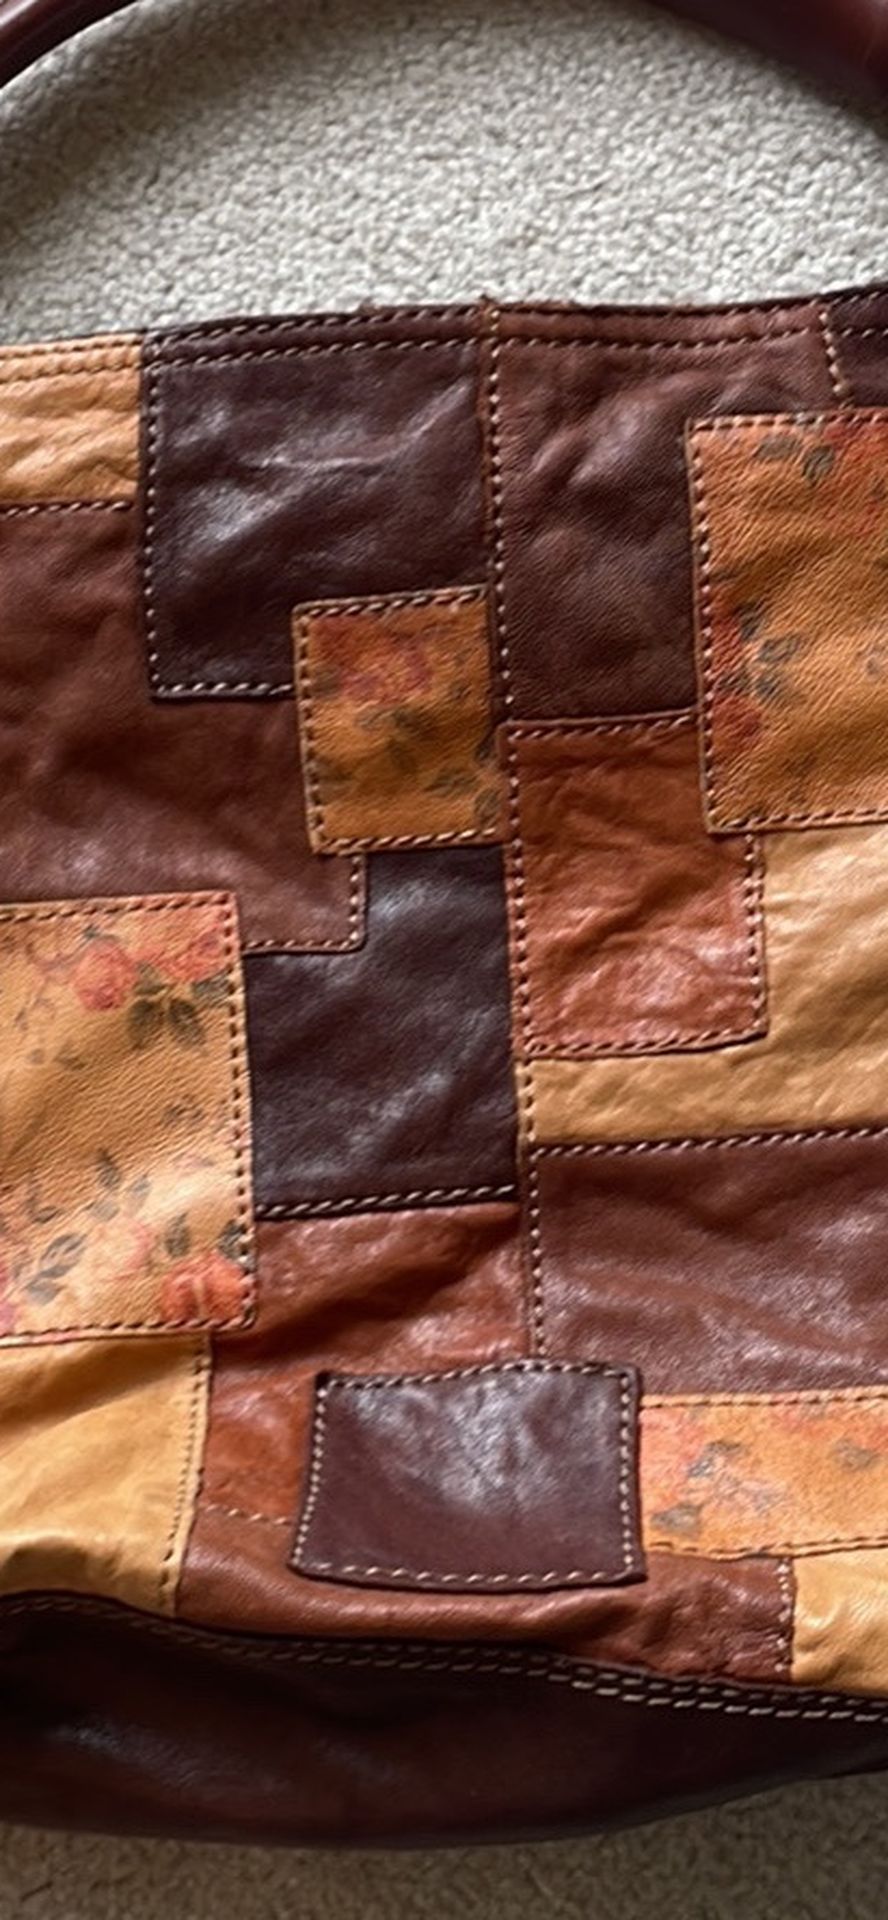 LUCKY BRAND Leather Patchwork Bag